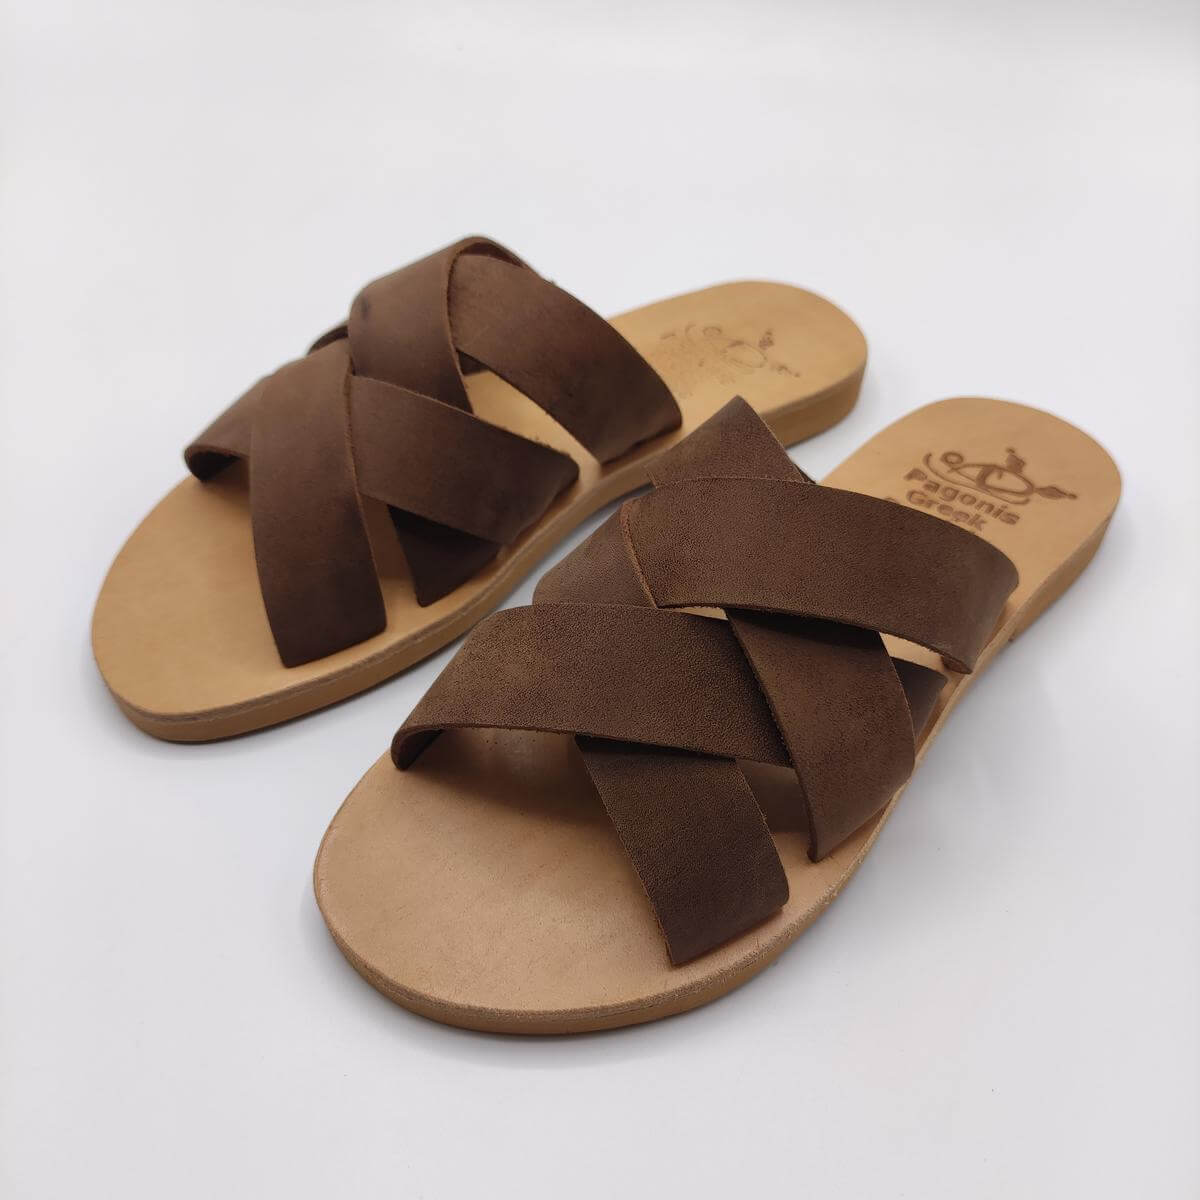 Criss Cross Woven Leather Slides Pagonis Nubuck Brown